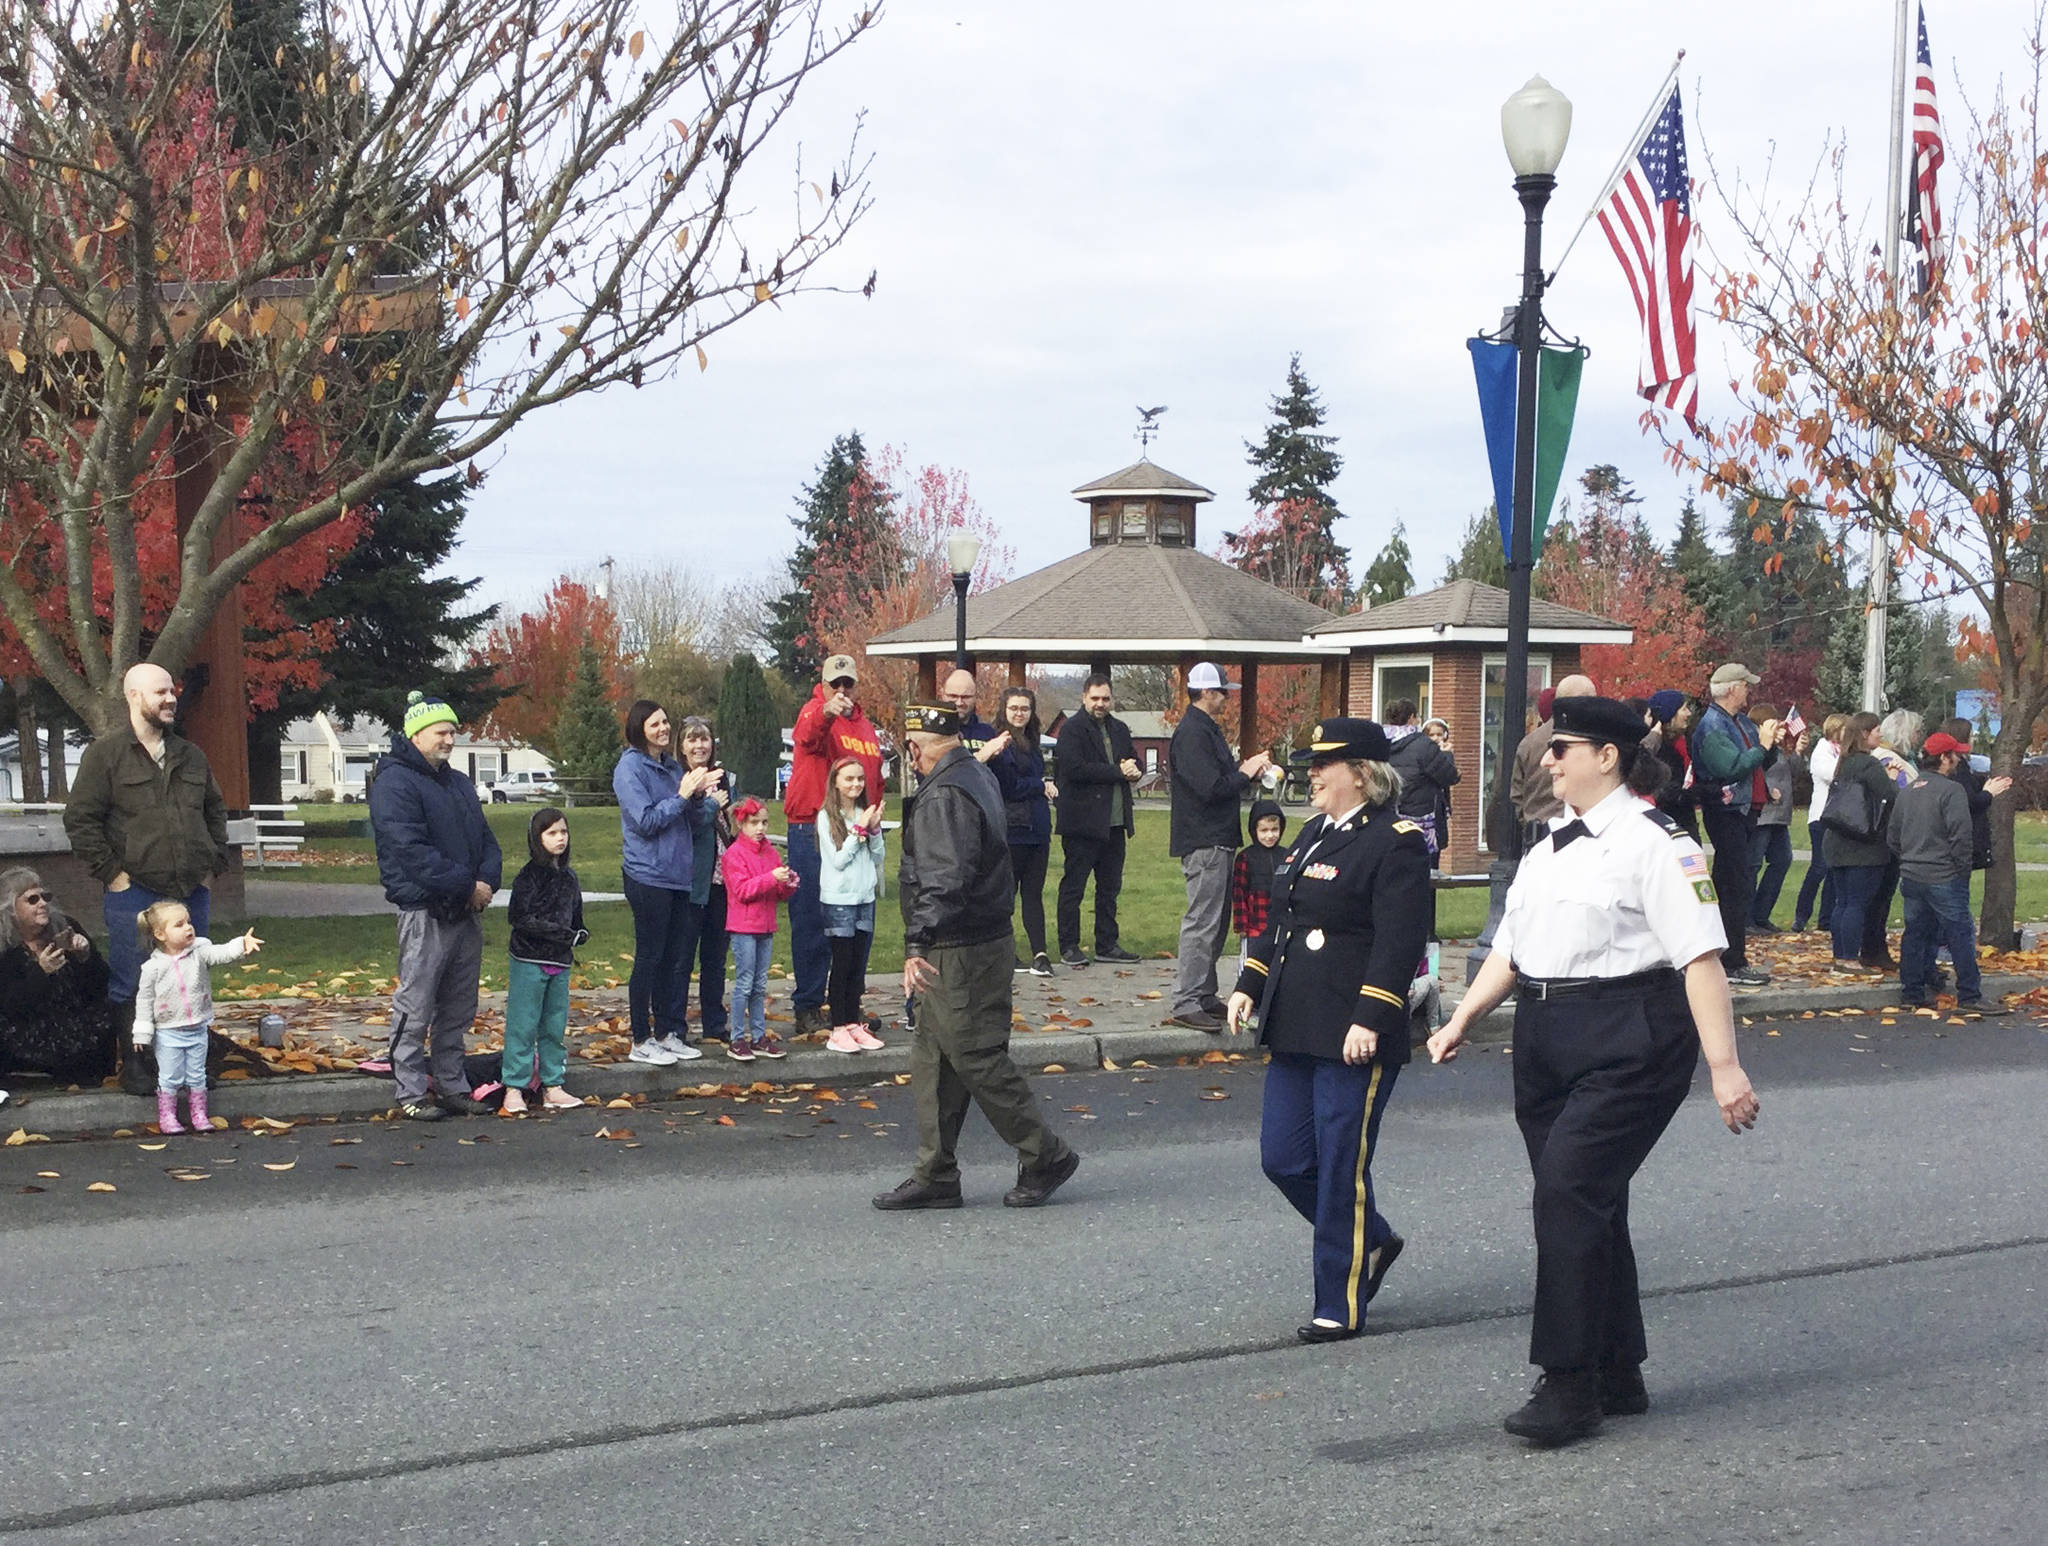 Arlington residents thanked military members for their service during the annual Veterans Day Parade Monday along Olympic Avenue.